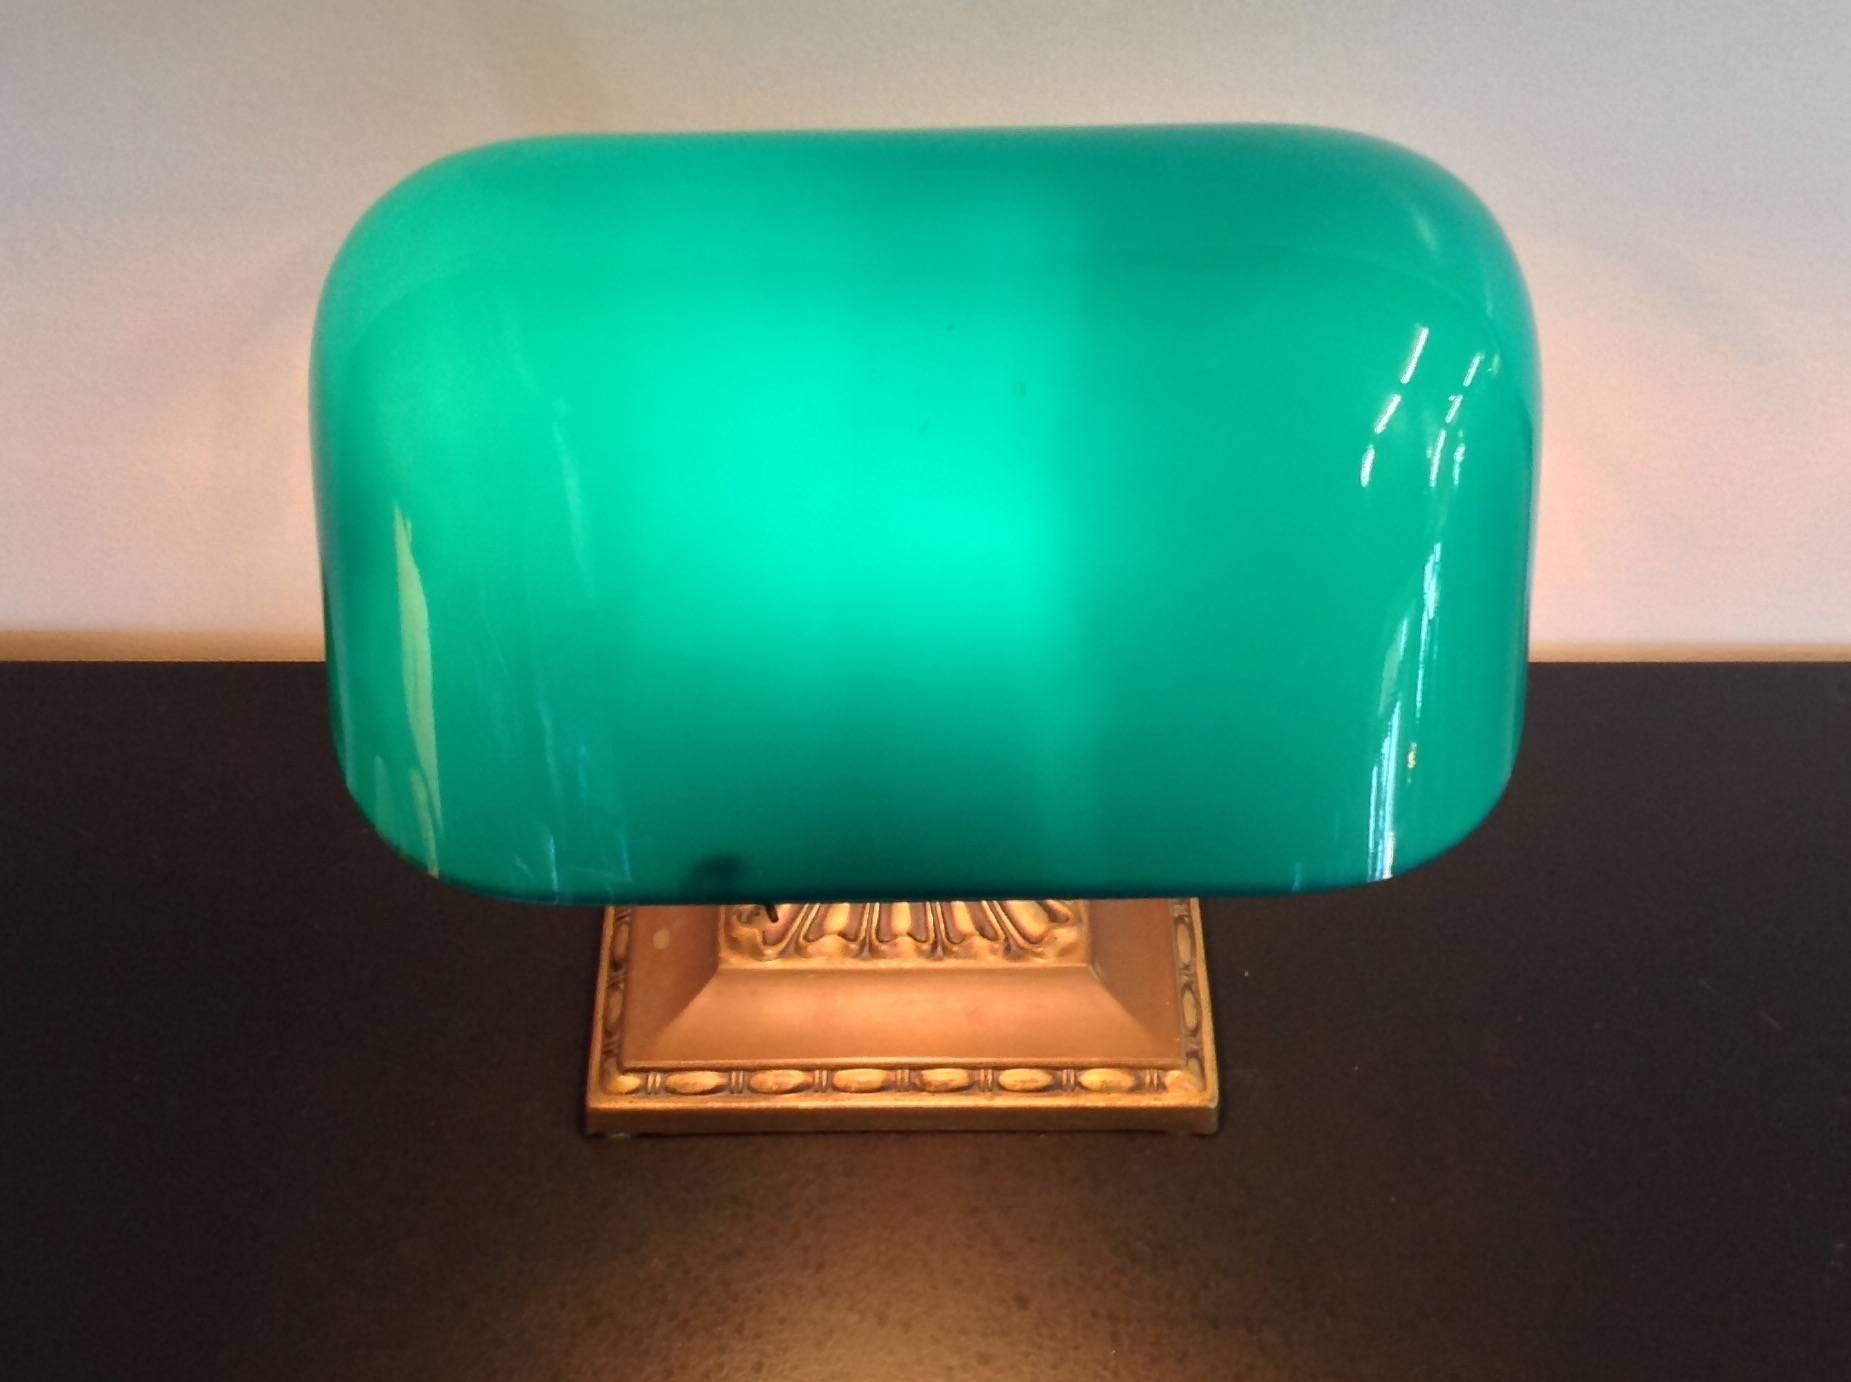 Signed Emeralite adjustable banker's lamp, circa 1916. Brass base and Stand and emerald green cased glass shade. Has been rewired to UL standards. Measures 7 inches wide and 13 inches high.